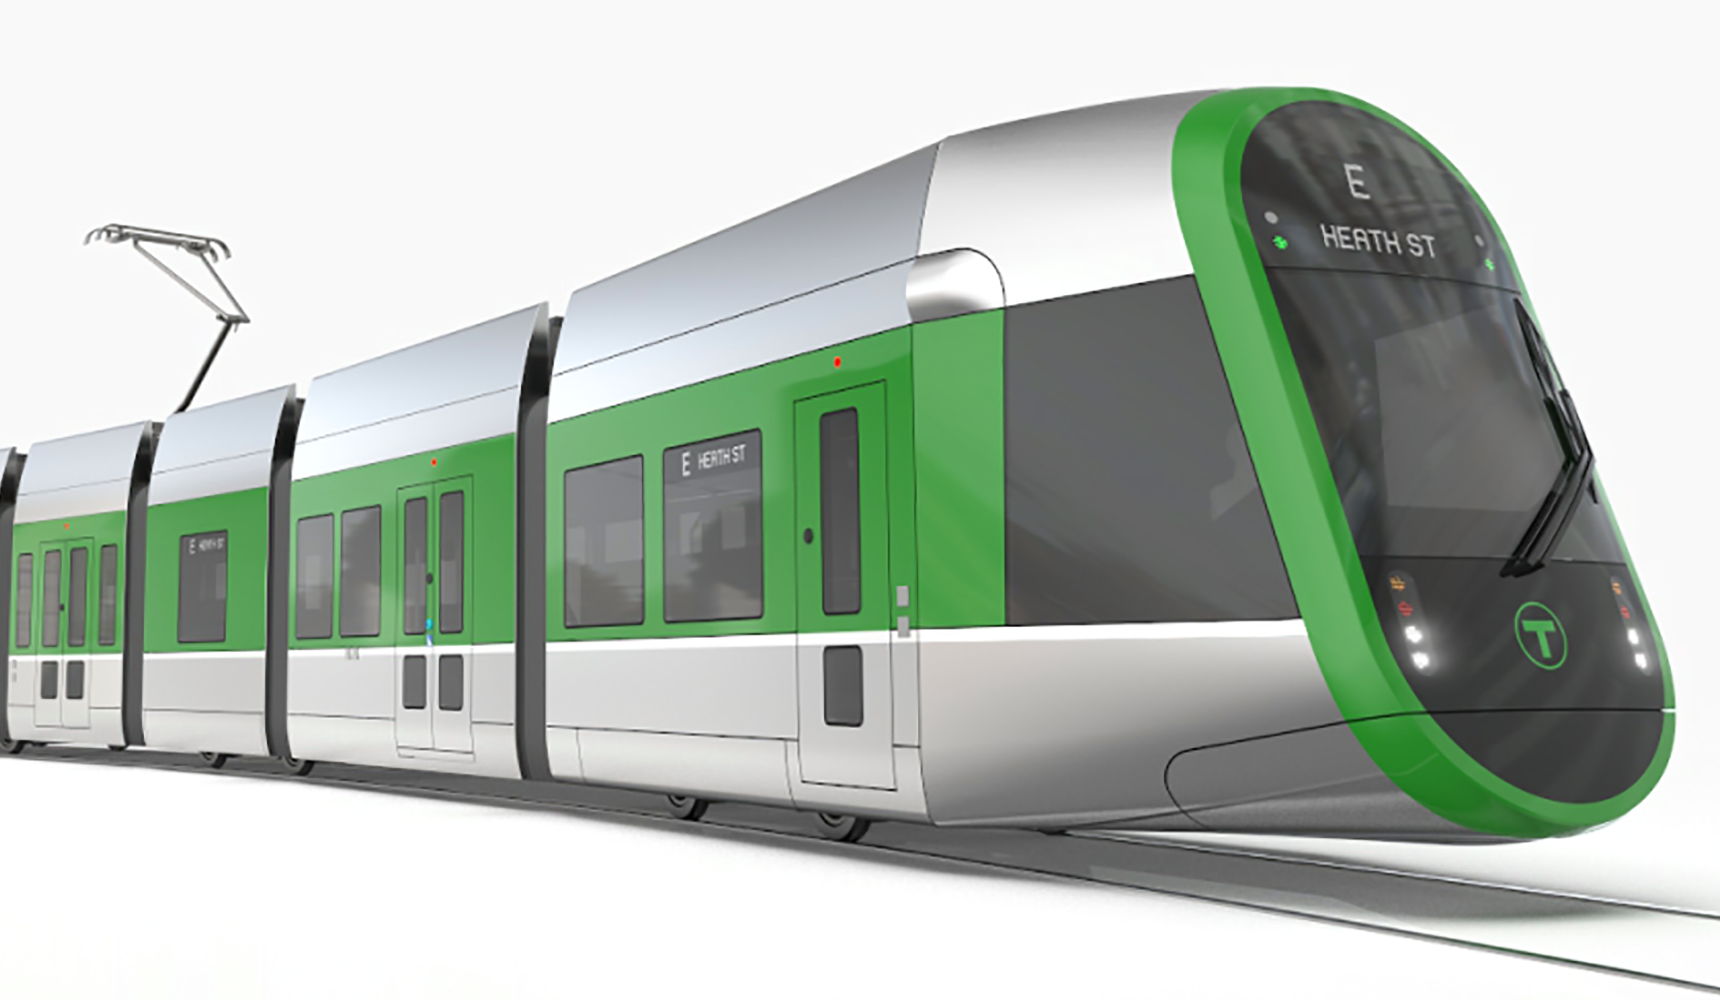 Render of a Type 10 tram for Boston